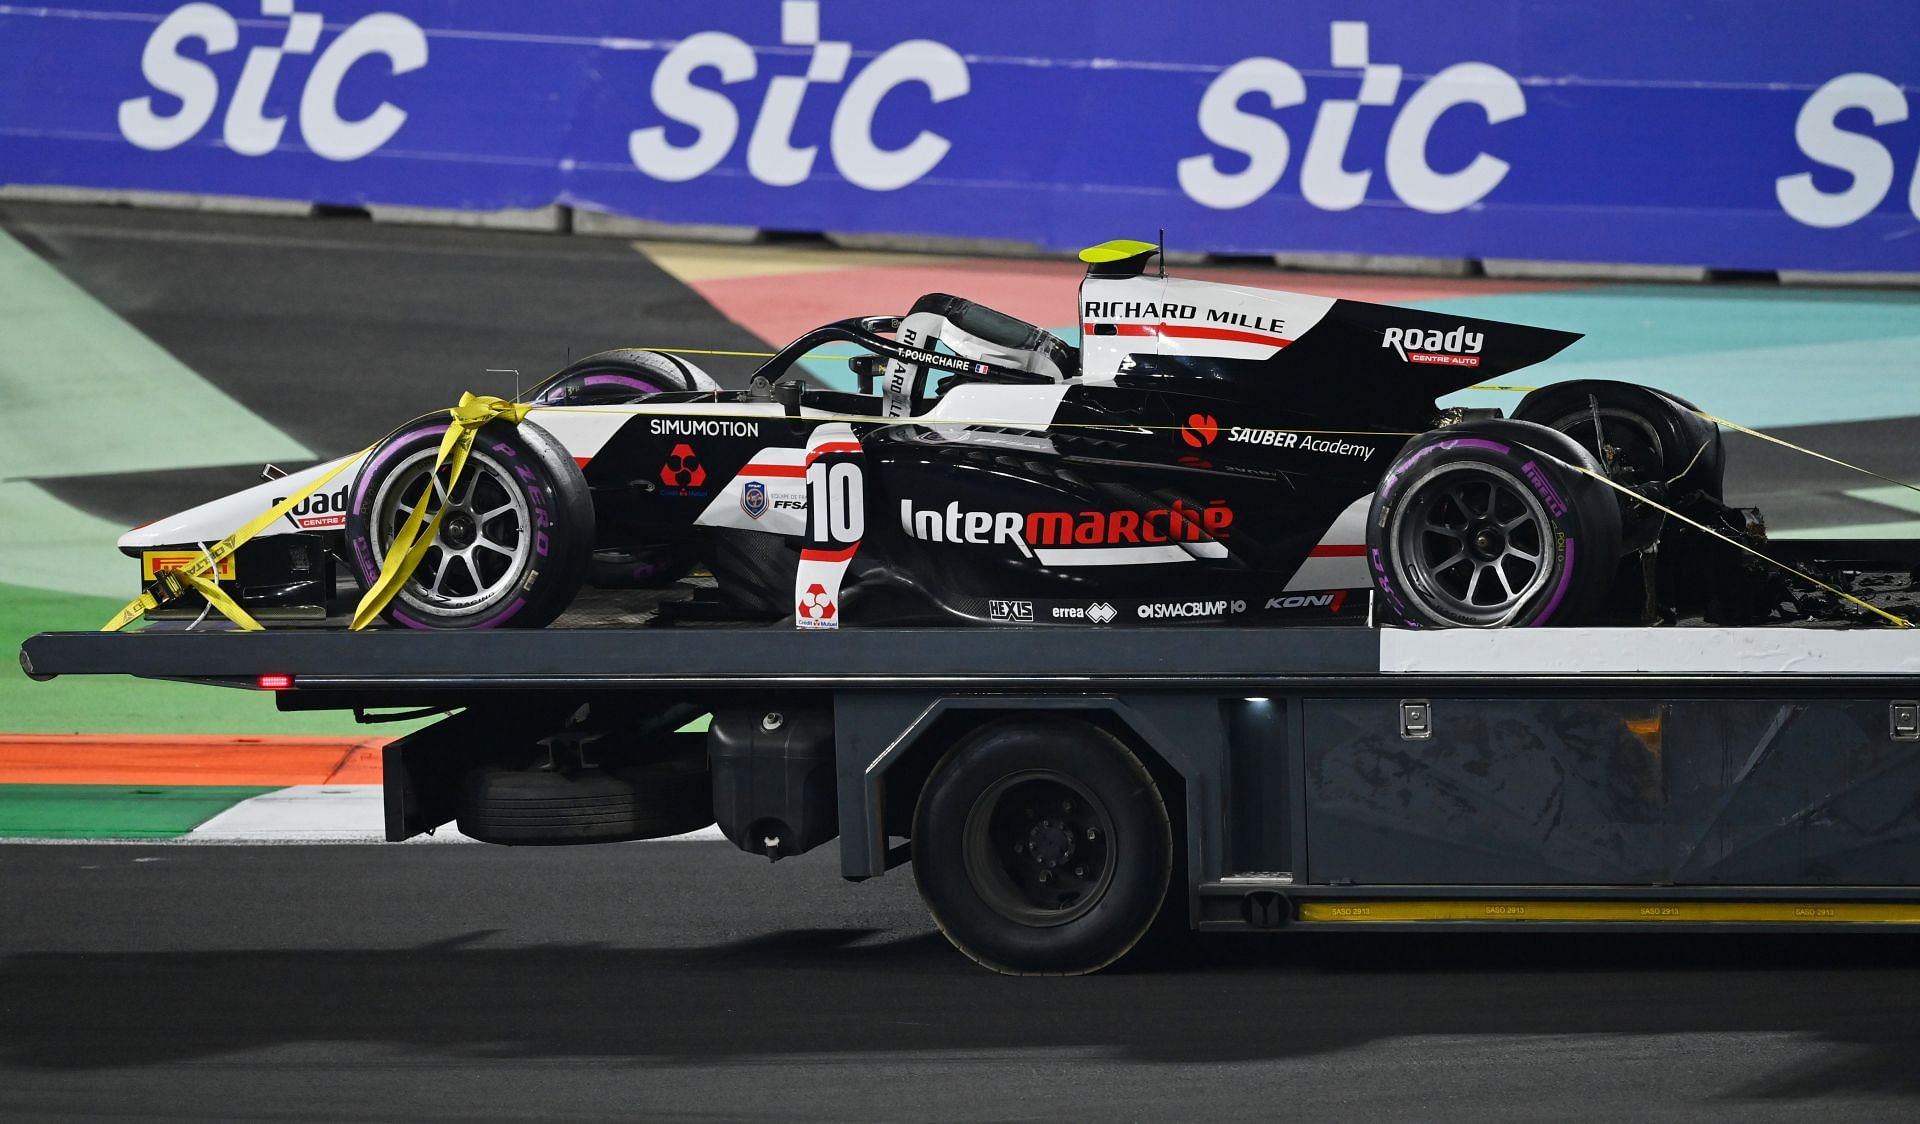 The car no.10 of Theo Pourchaire being carried away after the opening lap crash.